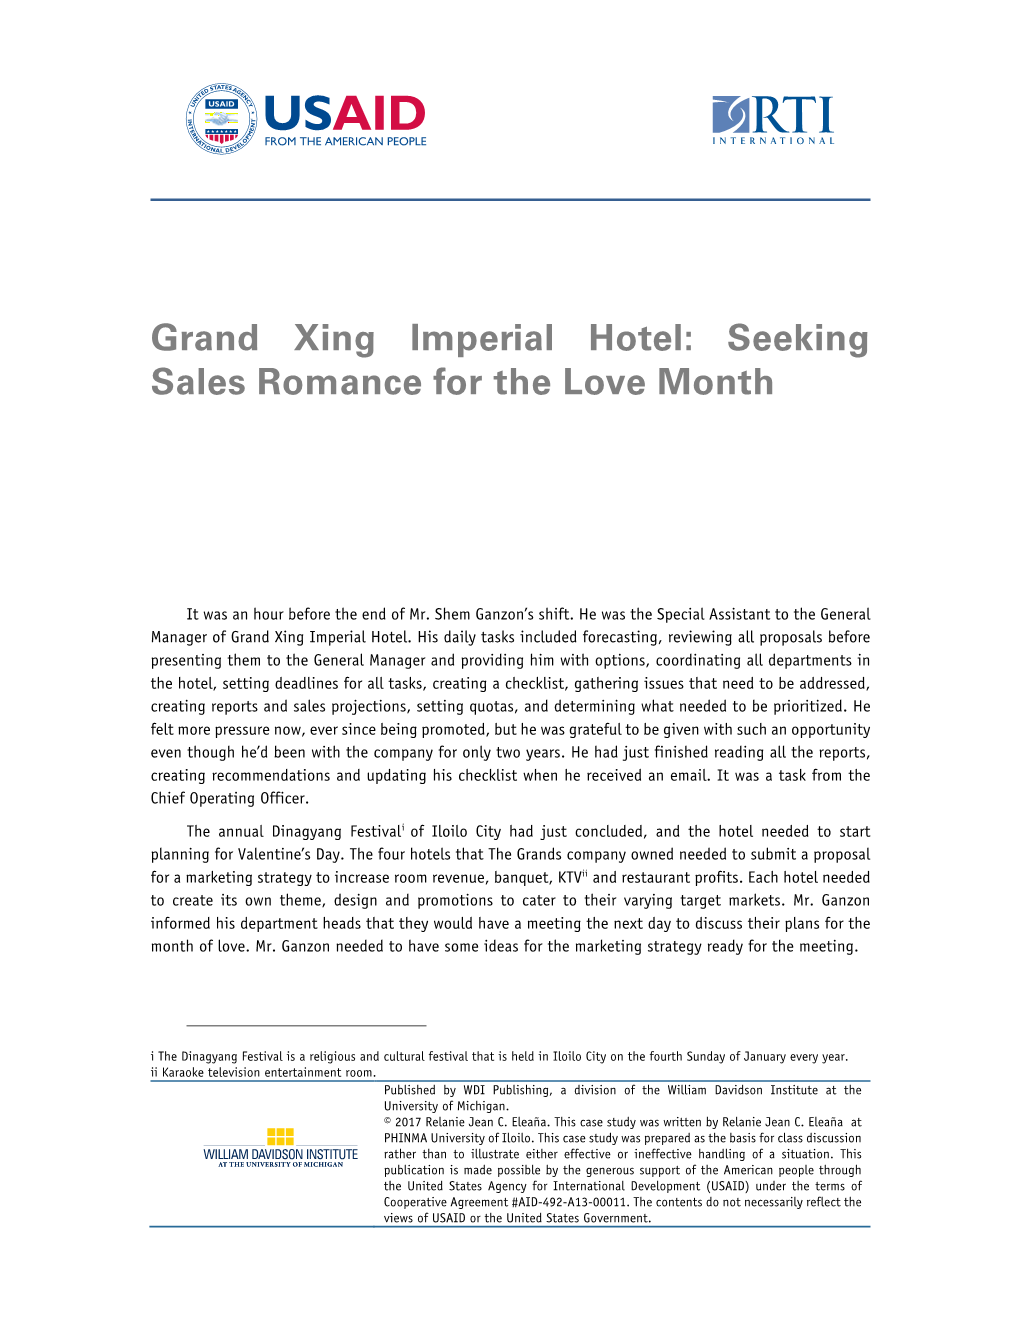 Grand Xing Imperial Hotel: Seeking Sales Romance for the Love Month